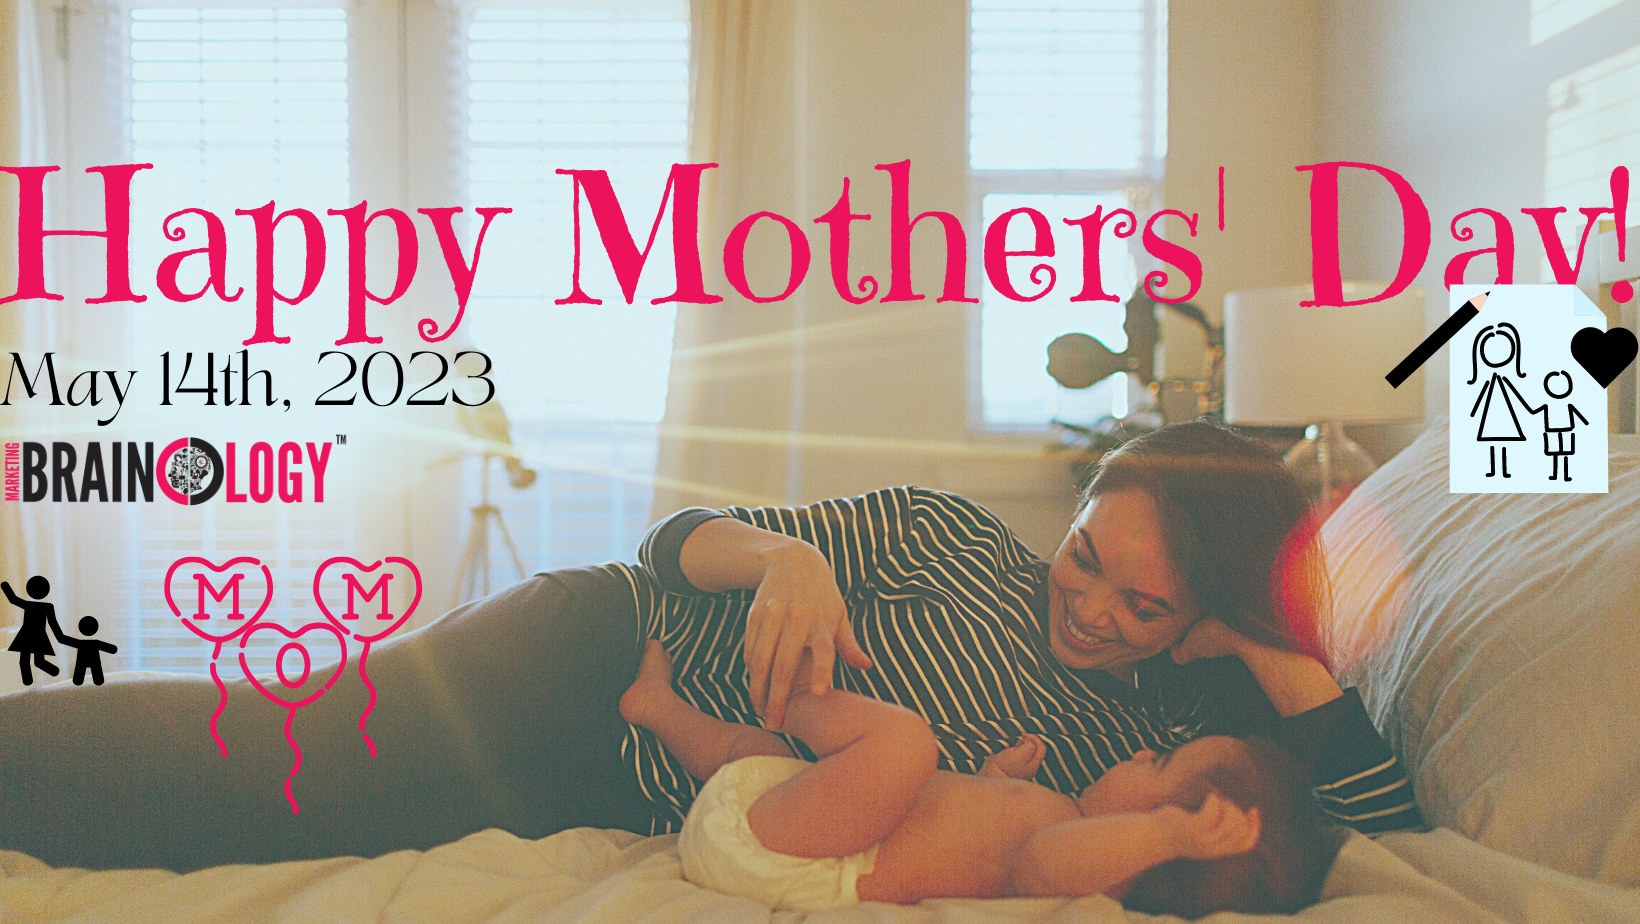 Happy Mother’s Day from Marketing Brainology